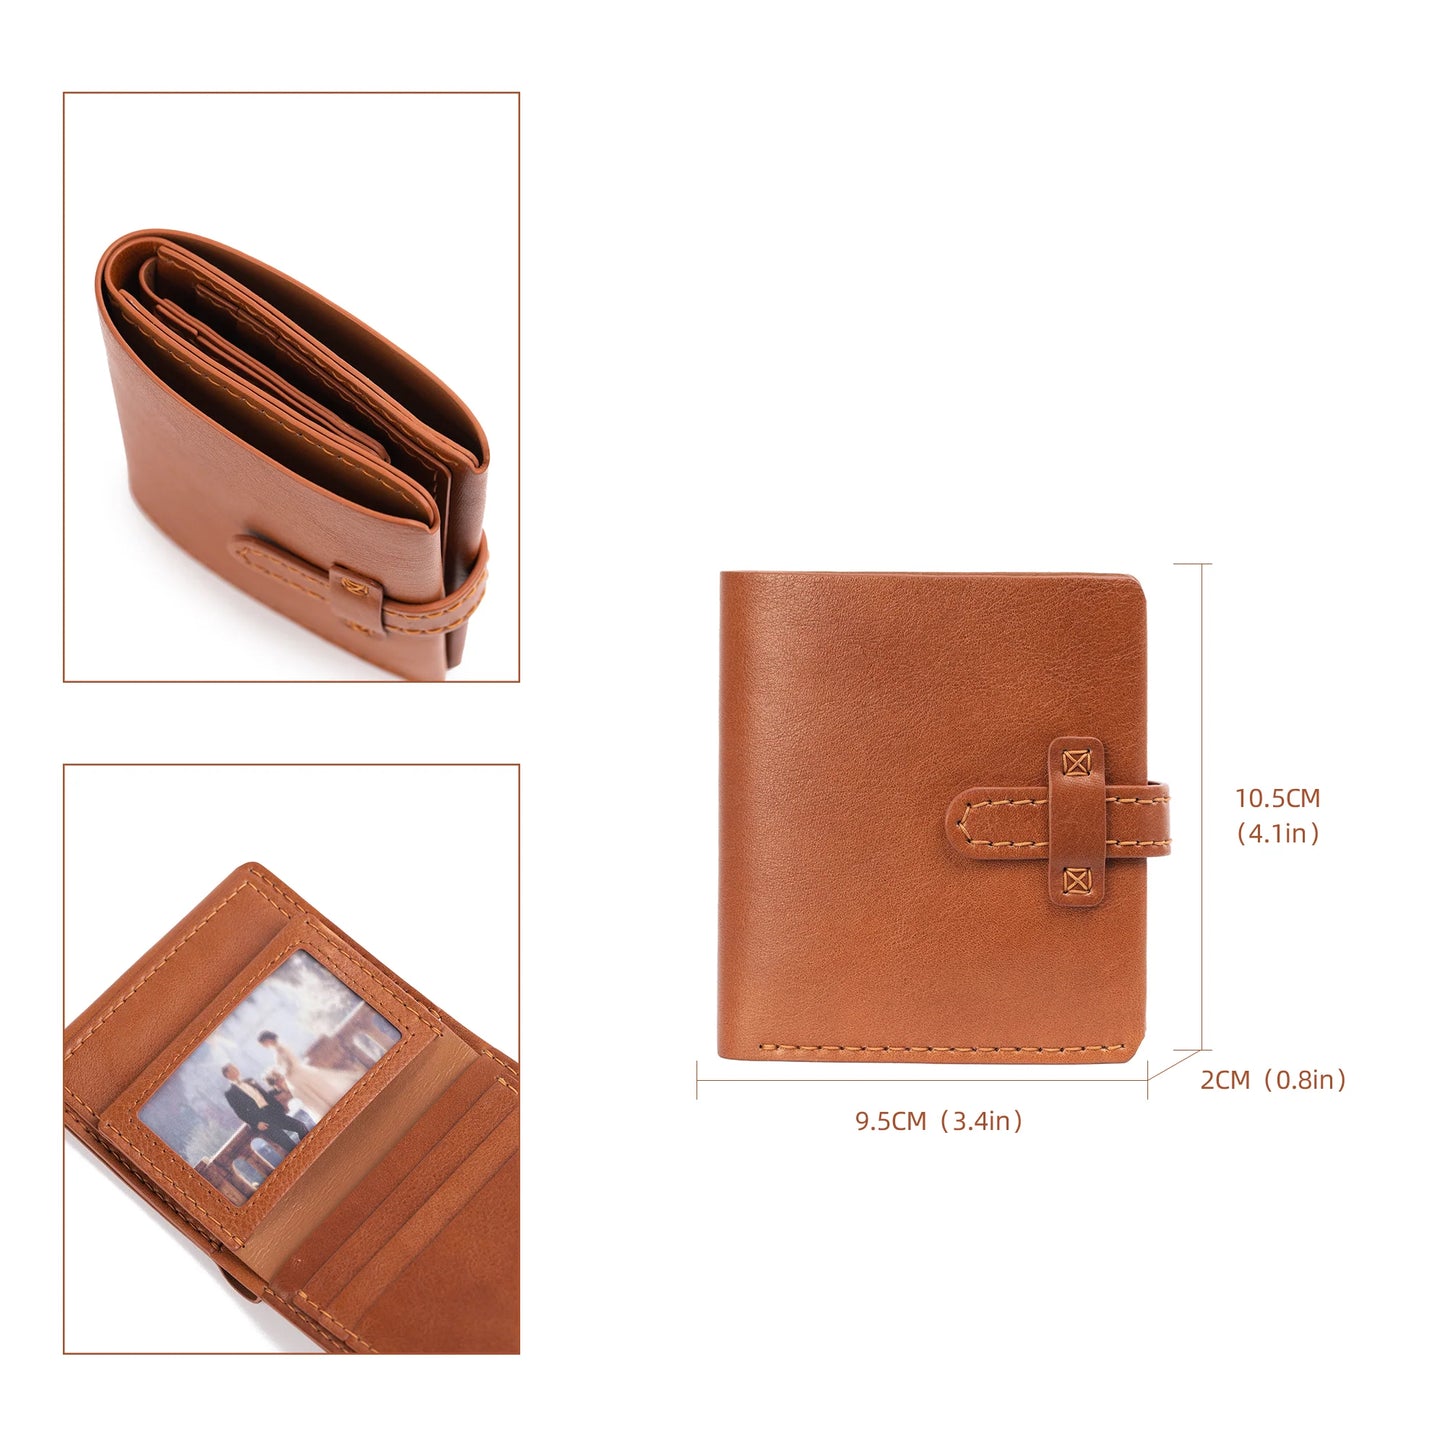 Sew Lisa Lam Porte Monnaie Real Leather Wallet - Rose